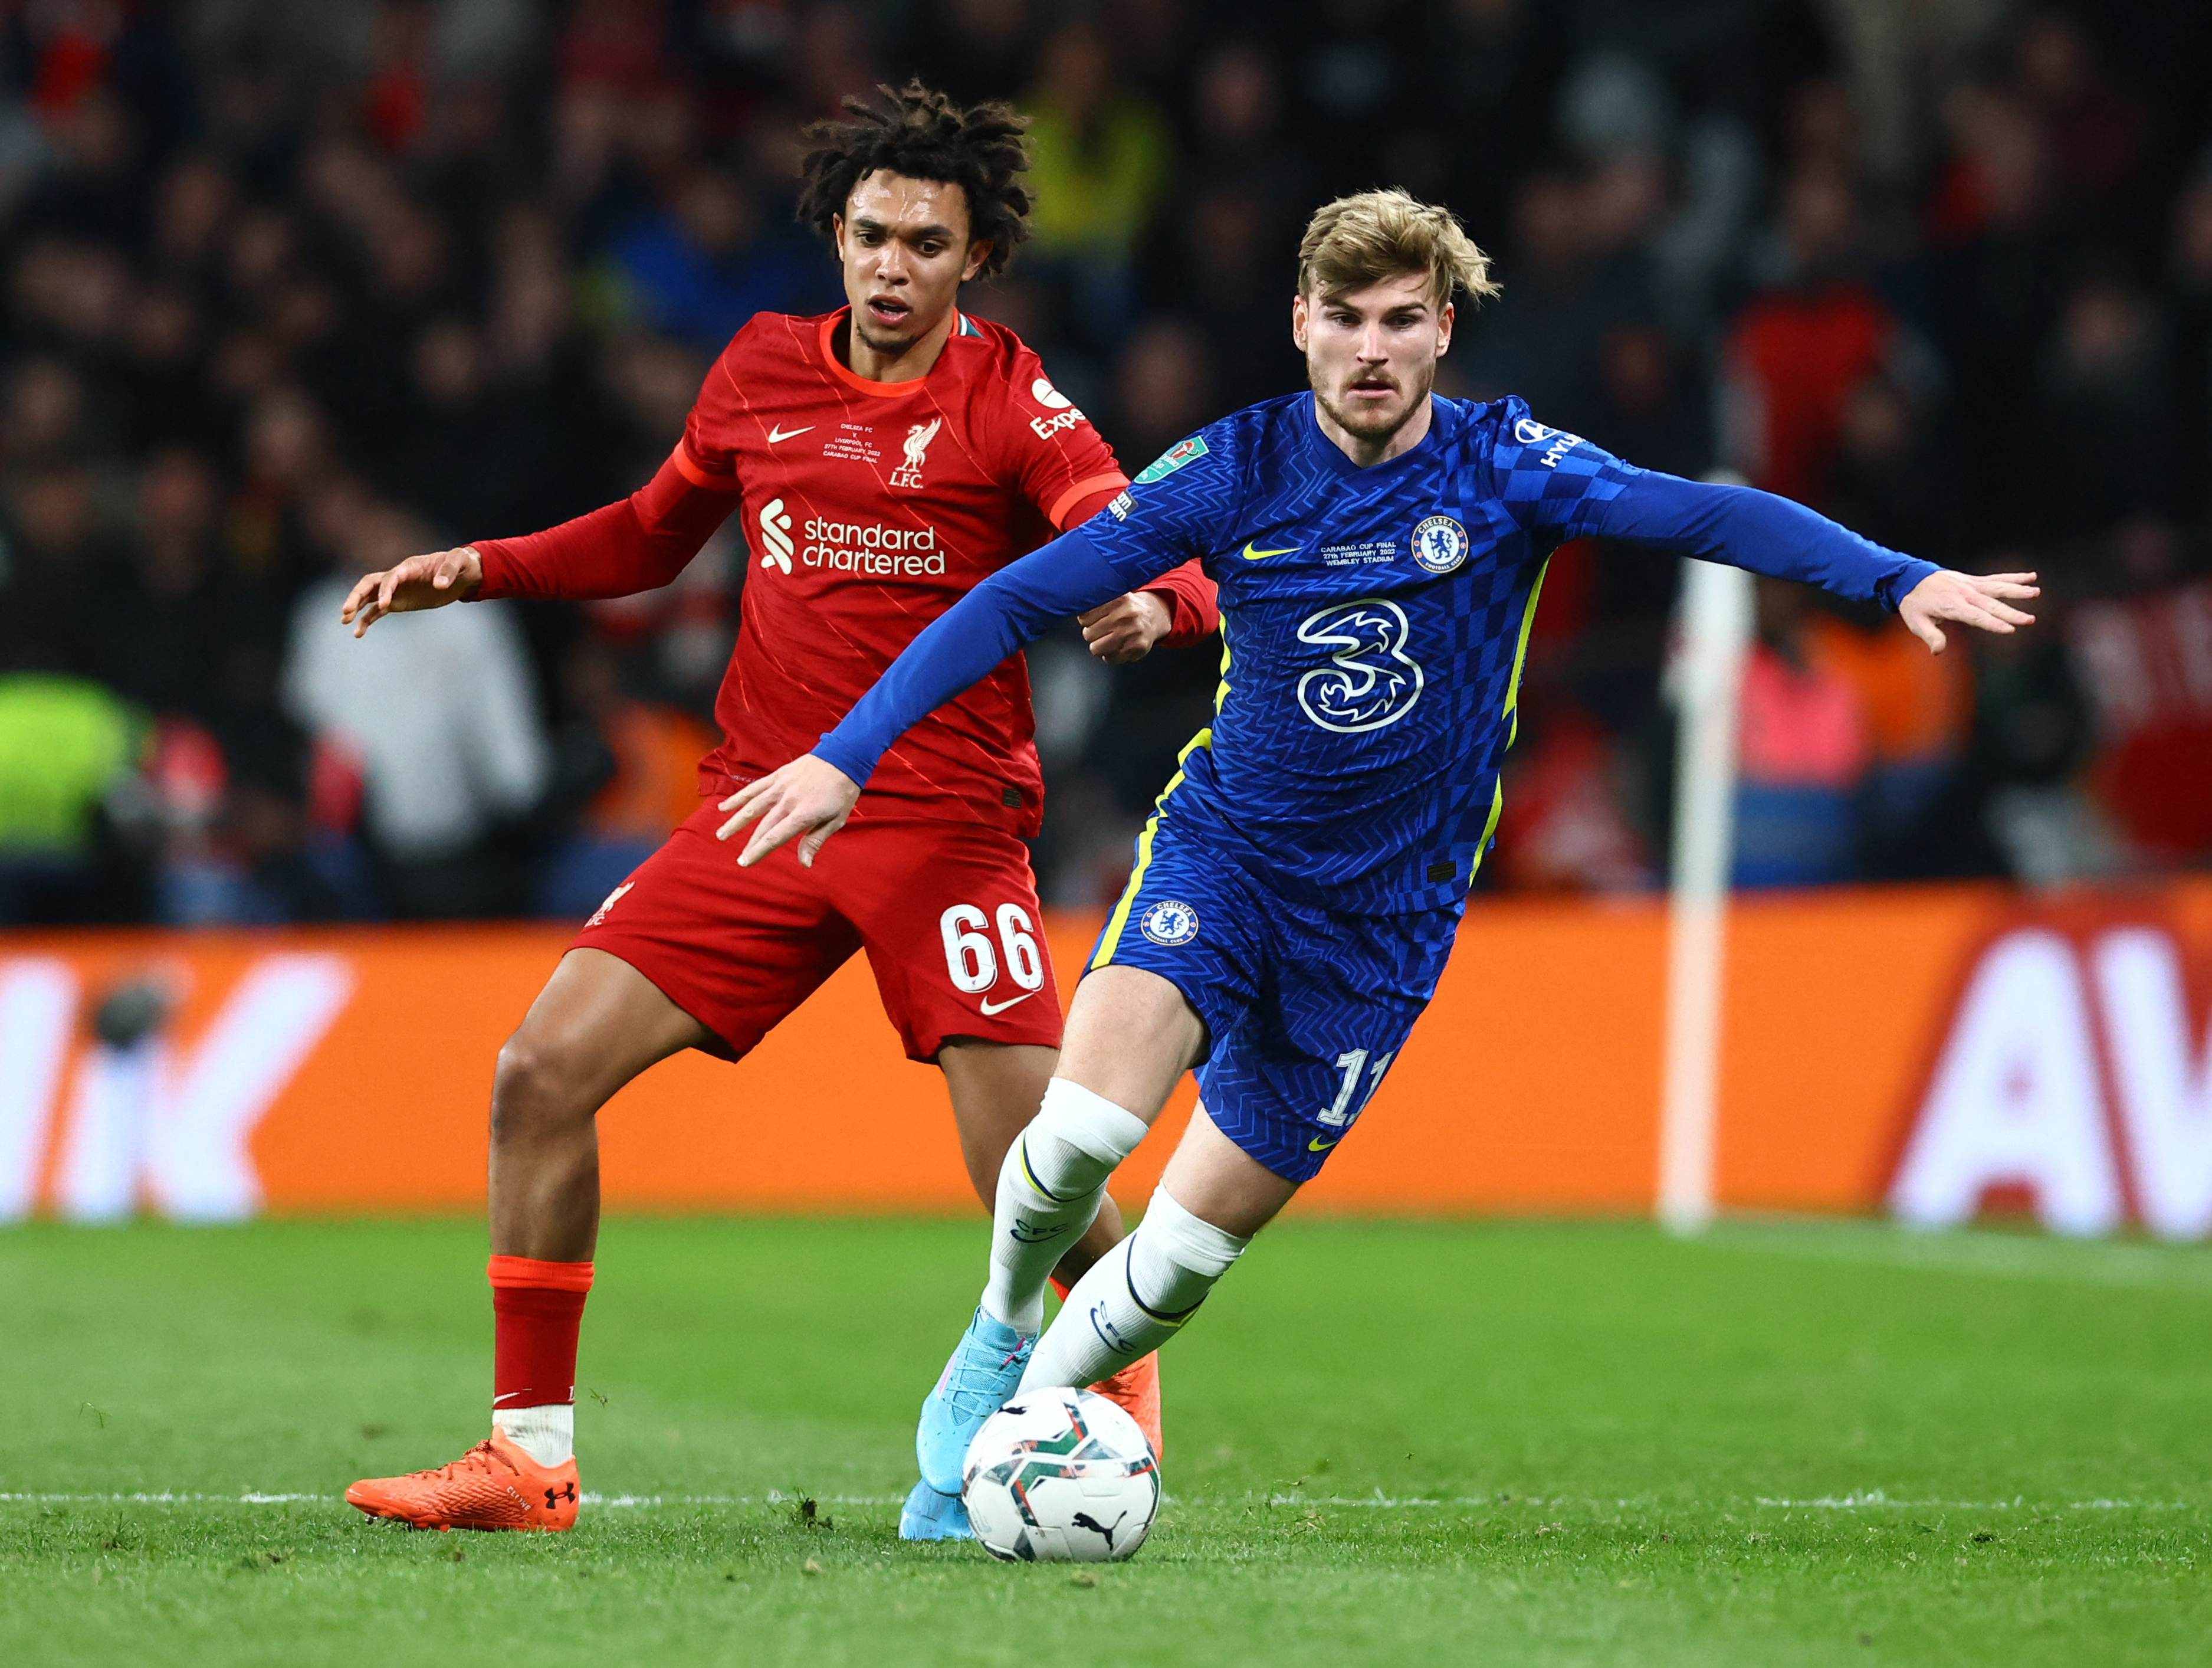 Carabao Cup Final - Chelsea v Liverpool